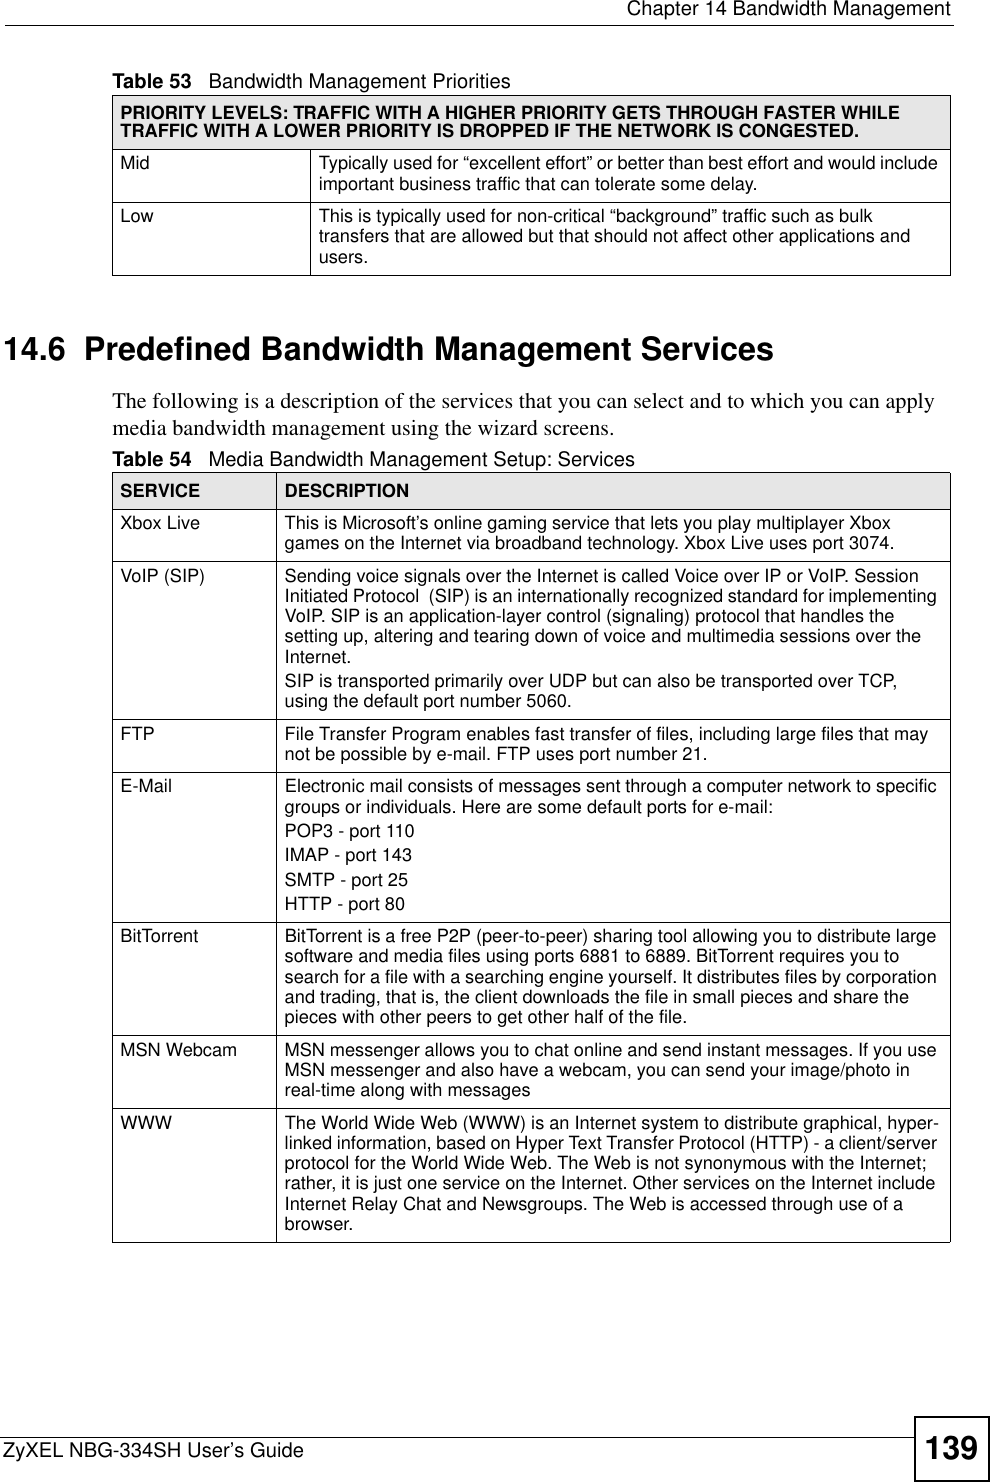  Chapter 14 Bandwidth ManagementZyXEL NBG-334SH User’s Guide 13914.6  Predefined Bandwidth Management ServicesThe following is a description of the services that you can select and to which you can apply media bandwidth management using the wizard screens. Mid  Typically used for “excellent effort” or better than best effort and would include important business traffic that can tolerate some delay.Low This is typically used for non-critical “background” traffic such as bulk transfers that are allowed but that should not affect other applications and users.Table 53   Bandwidth Management PrioritiesPRIORITY LEVELS: TRAFFIC WITH A HIGHER PRIORITY GETS THROUGH FASTER WHILE TRAFFIC WITH A LOWER PRIORITY IS DROPPED IF THE NETWORK IS CONGESTED.Table 54   Media Bandwidth Management Setup: ServicesSERVICE DESCRIPTIONXbox Live This is Microsoft’s online gaming service that lets you play multiplayer Xbox games on the Internet via broadband technology. Xbox Live uses port 3074.VoIP (SIP) Sending voice signals over the Internet is called Voice over IP or VoIP. Session Initiated Protocol  (SIP) is an internationally recognized standard for implementing VoIP. SIP is an application-layer control (signaling) protocol that handles the setting up, altering and tearing down of voice and multimedia sessions over the Internet.SIP is transported primarily over UDP but can also be transported over TCP, using the default port number 5060. FTP File Transfer Program enables fast transfer of files, including large files that may not be possible by e-mail. FTP uses port number 21.E-Mail Electronic mail consists of messages sent through a computer network to specific groups or individuals. Here are some default ports for e-mail: POP3 - port 110IMAP - port 143SMTP - port 25HTTP - port 80BitTorrent BitTorrent is a free P2P (peer-to-peer) sharing tool allowing you to distribute large software and media files using ports 6881 to 6889. BitTorrent requires you to search for a file with a searching engine yourself. It distributes files by corporation and trading, that is, the client downloads the file in small pieces and share the pieces with other peers to get other half of the file.MSN Webcam MSN messenger allows you to chat online and send instant messages. If you use MSN messenger and also have a webcam, you can send your image/photo in real-time along with messagesWWW The World Wide Web (WWW) is an Internet system to distribute graphical, hyper-linked information, based on Hyper Text Transfer Protocol (HTTP) - a client/server protocol for the World Wide Web. The Web is not synonymous with the Internet; rather, it is just one service on the Internet. Other services on the Internet include Internet Relay Chat and Newsgroups. The Web is accessed through use of a browser.